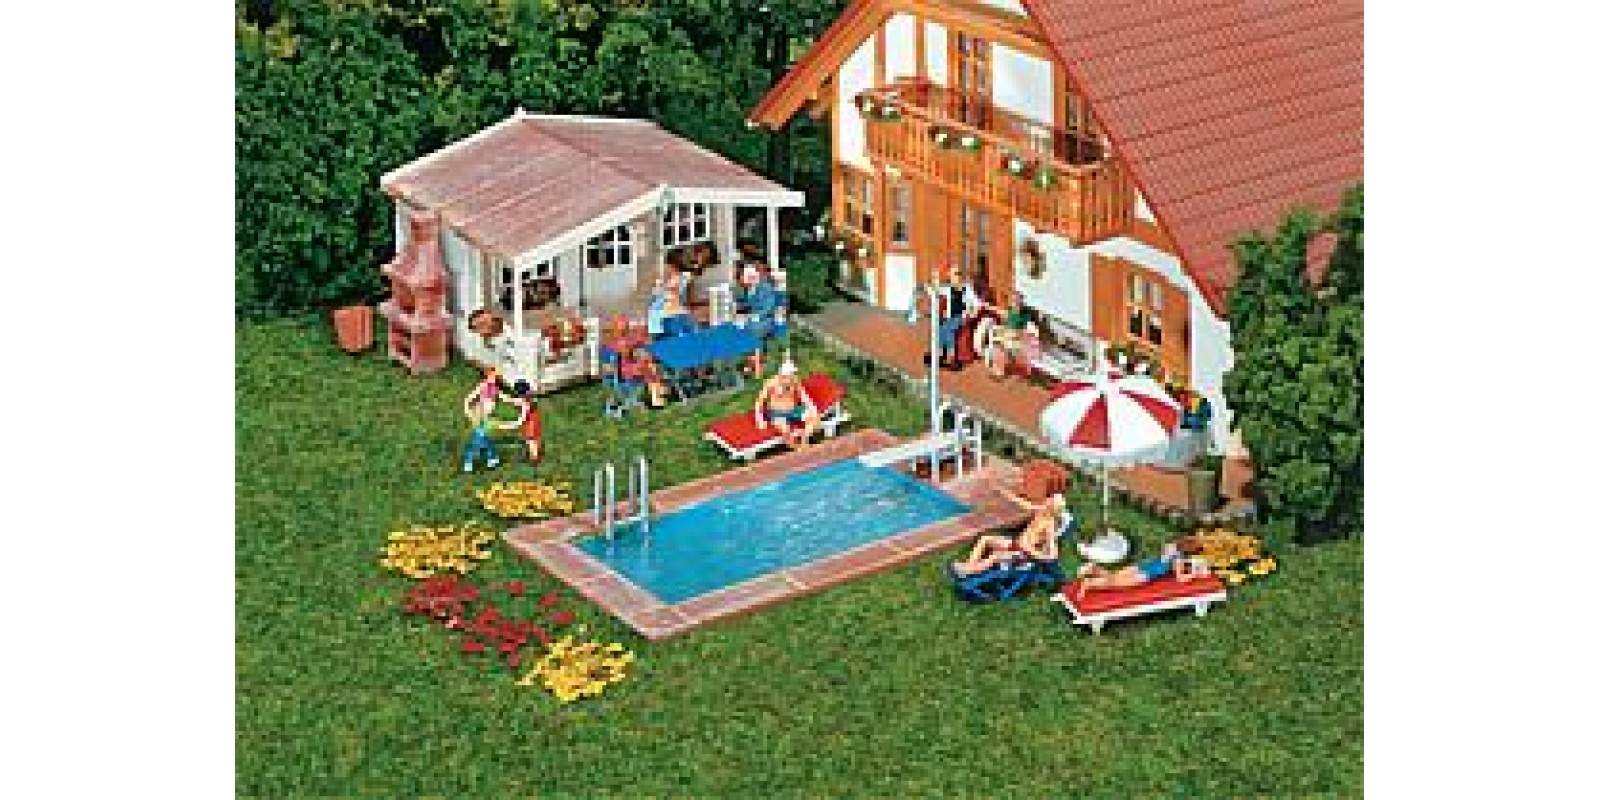 FA180542	 Swimming pool and utility shed